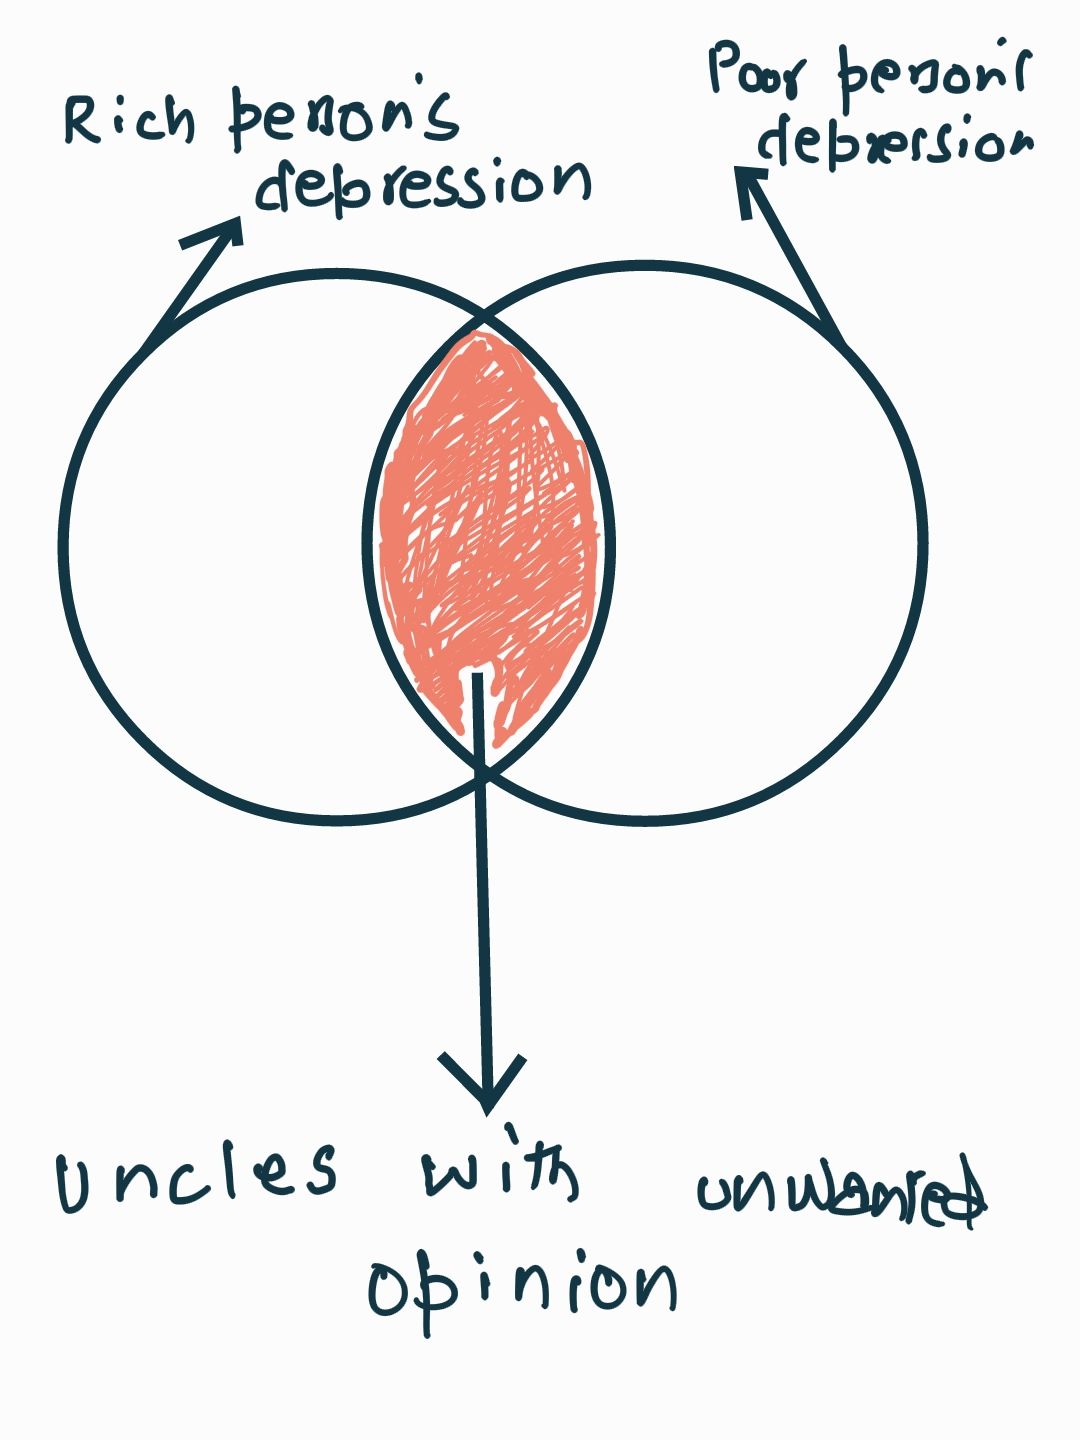 A venn diagram with two circles labelled as "rich person's depression" and "poor person's depression". The intersecting part is labelled "uncles with unwanted opinion".